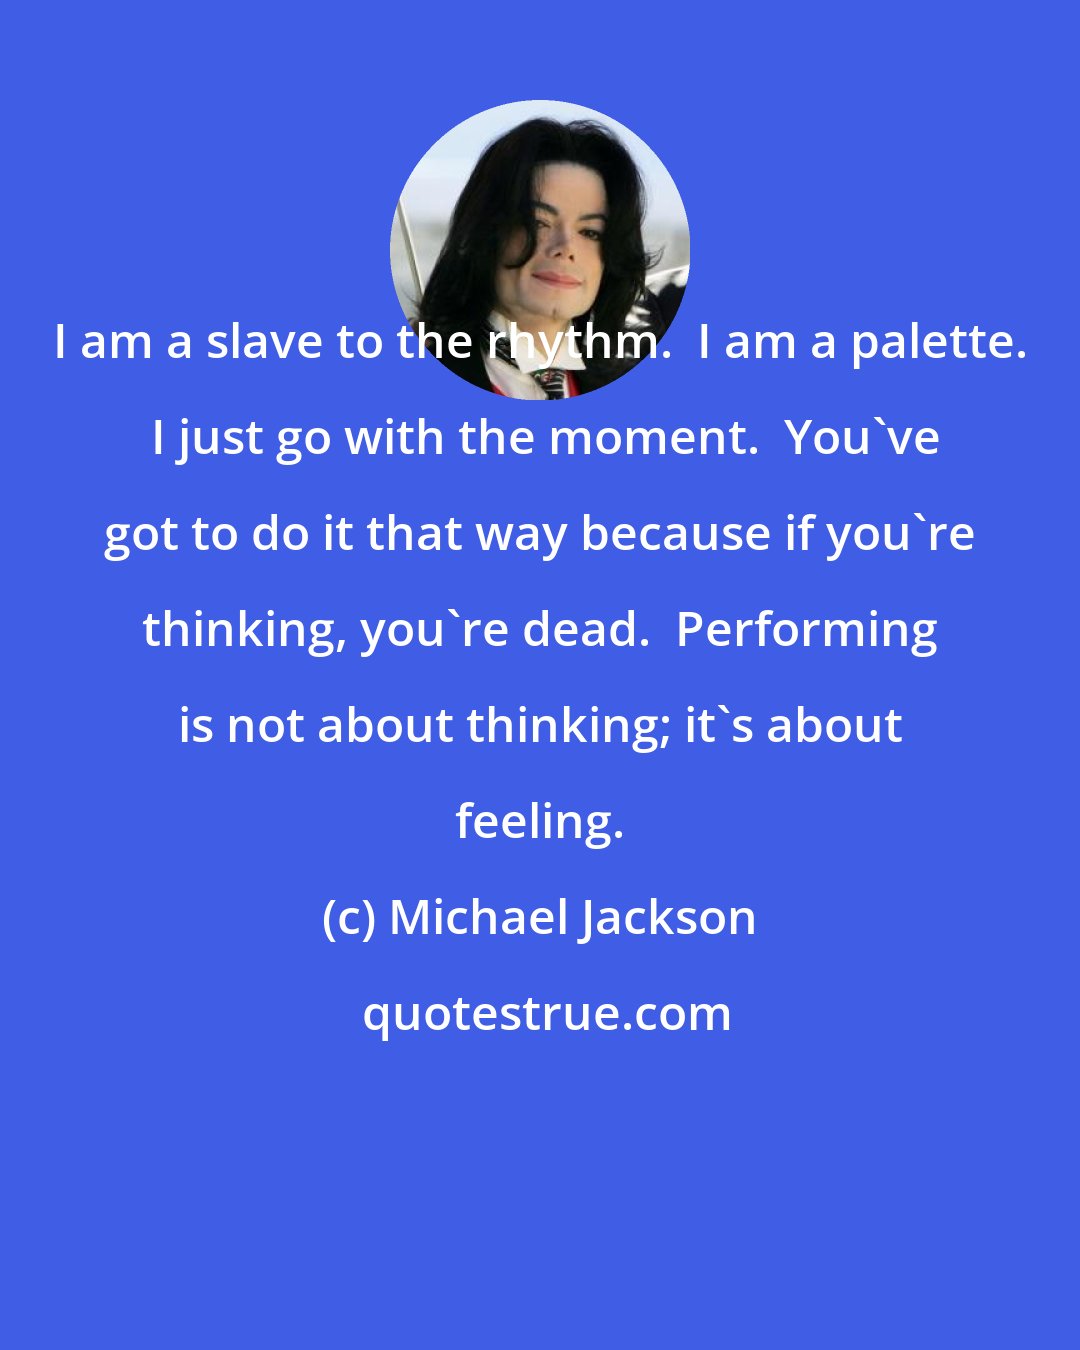 Michael Jackson: I am a slave to the rhythm.  I am a palette.  I just go with the moment.  You've got to do it that way because if you're thinking, you're dead.  Performing is not about thinking; it's about feeling.